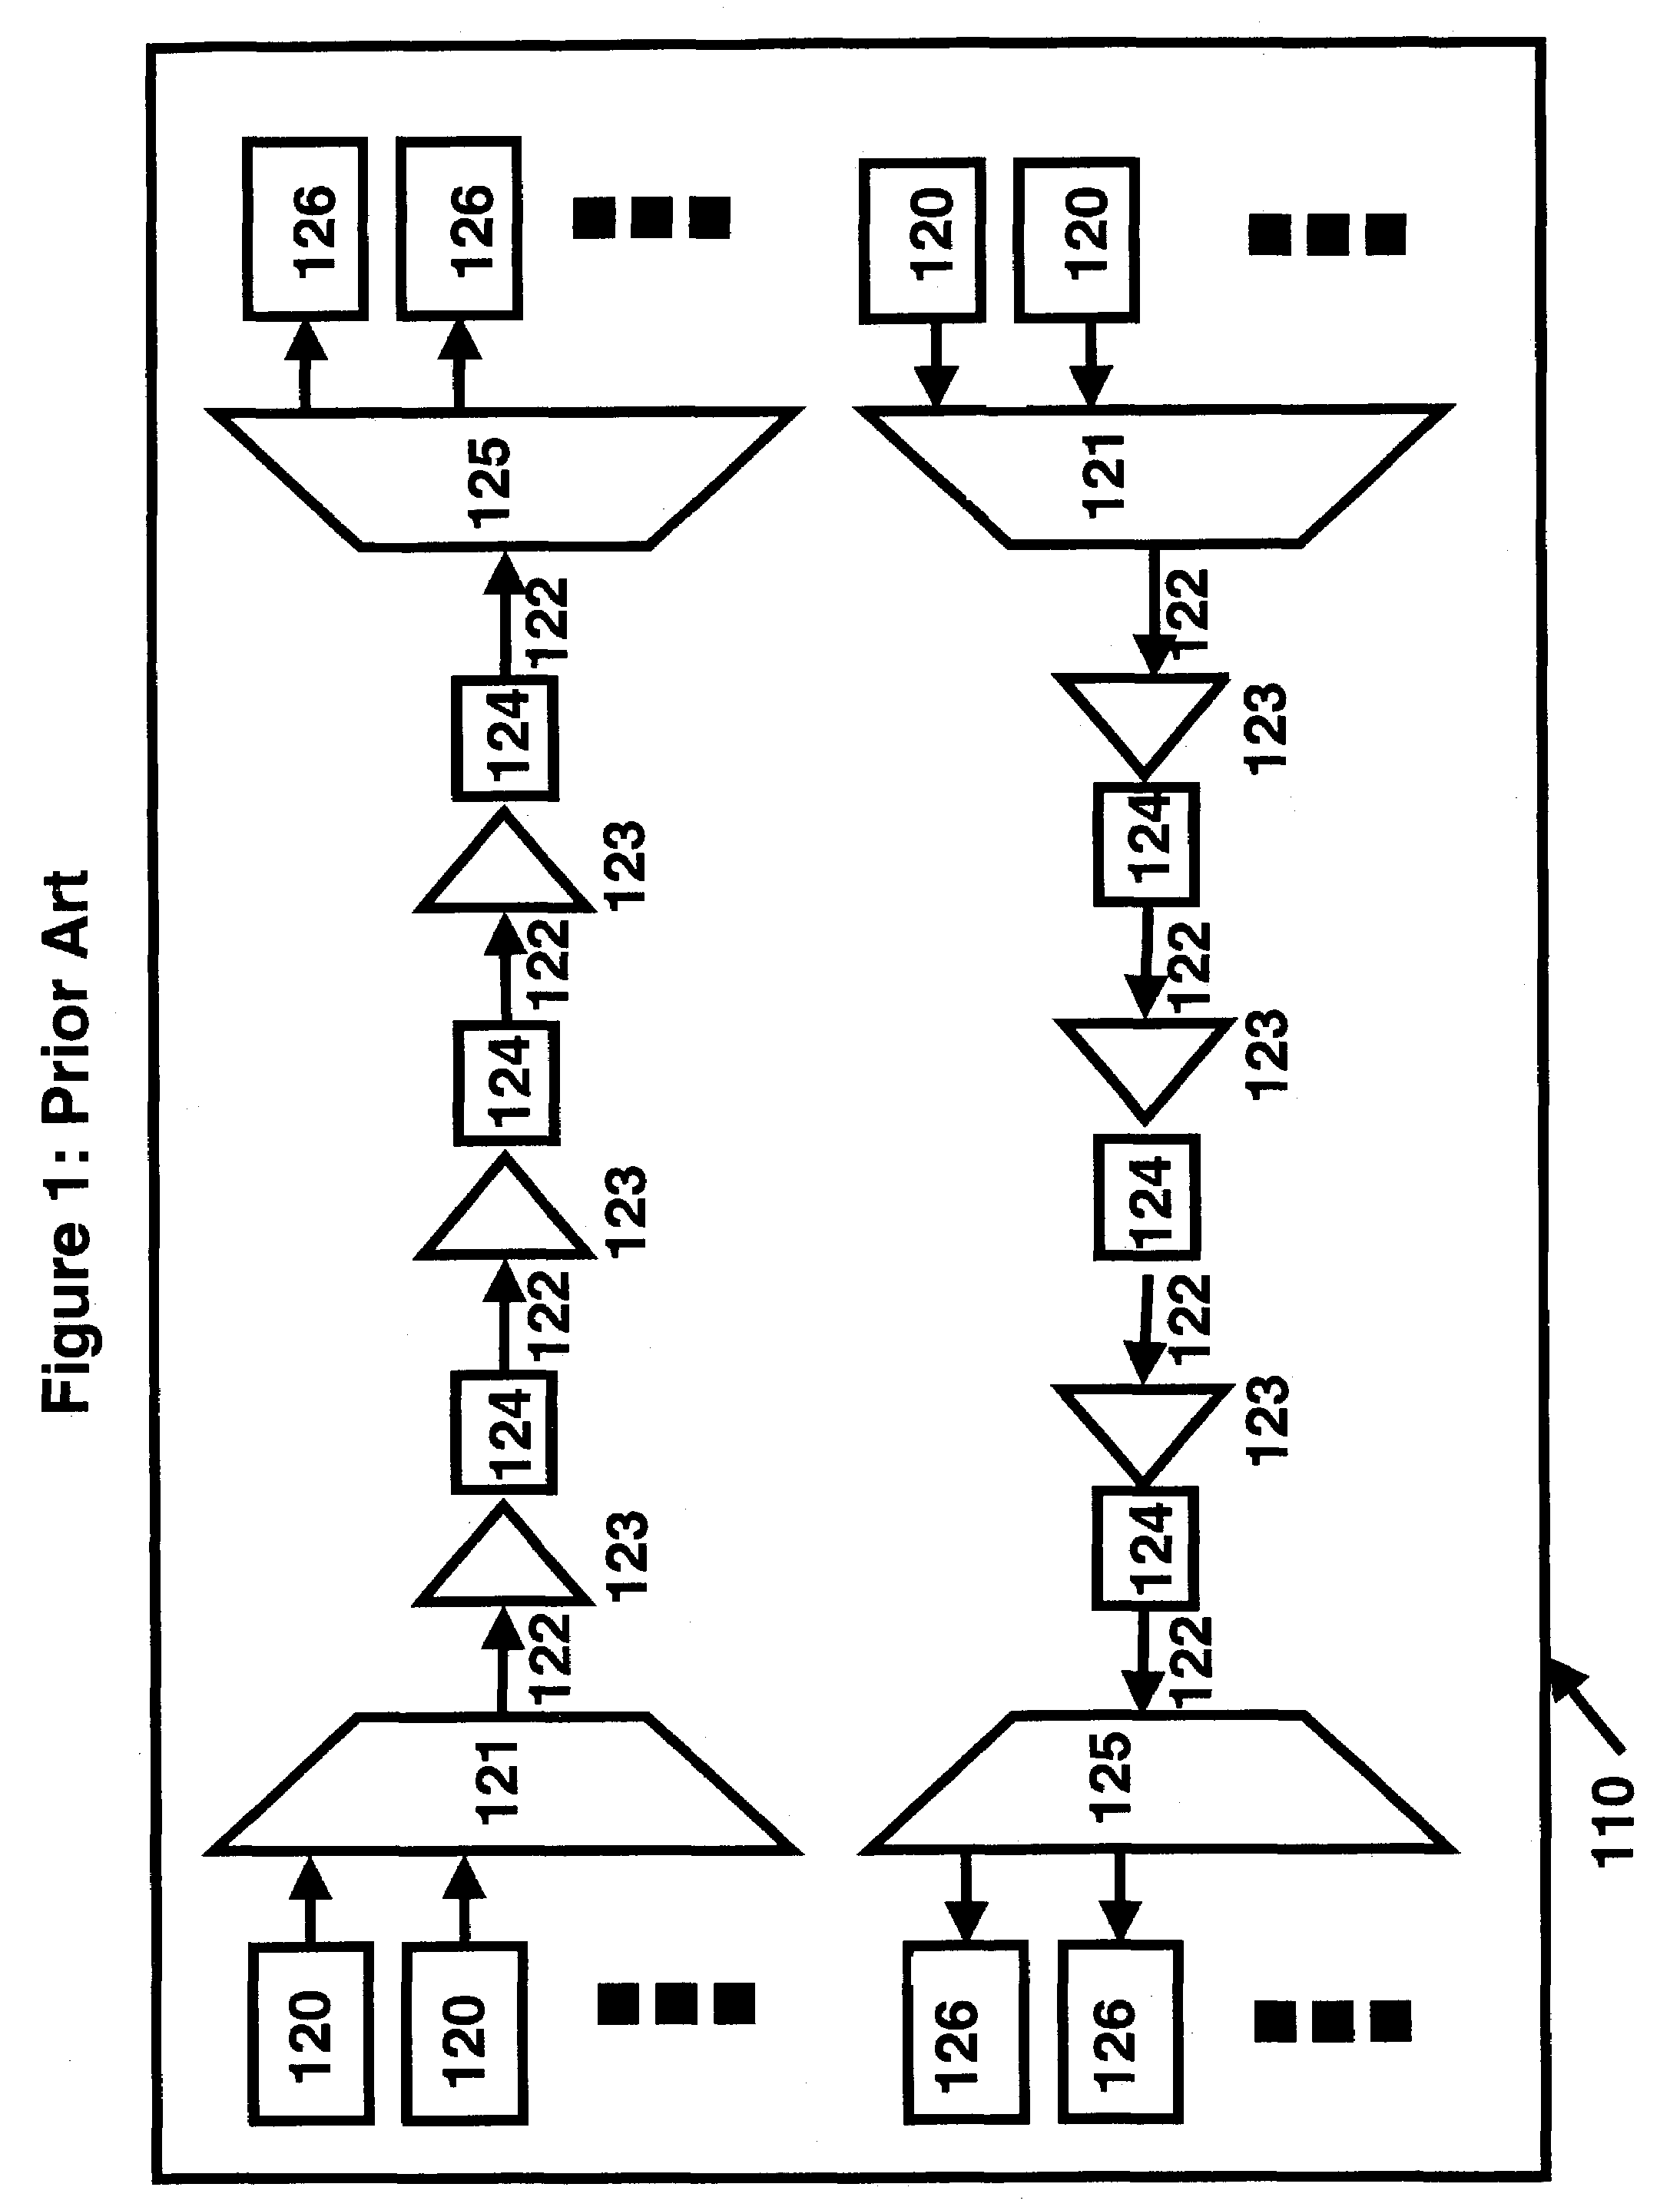 Apparatus and method for measuring the dispersion of a fiber span